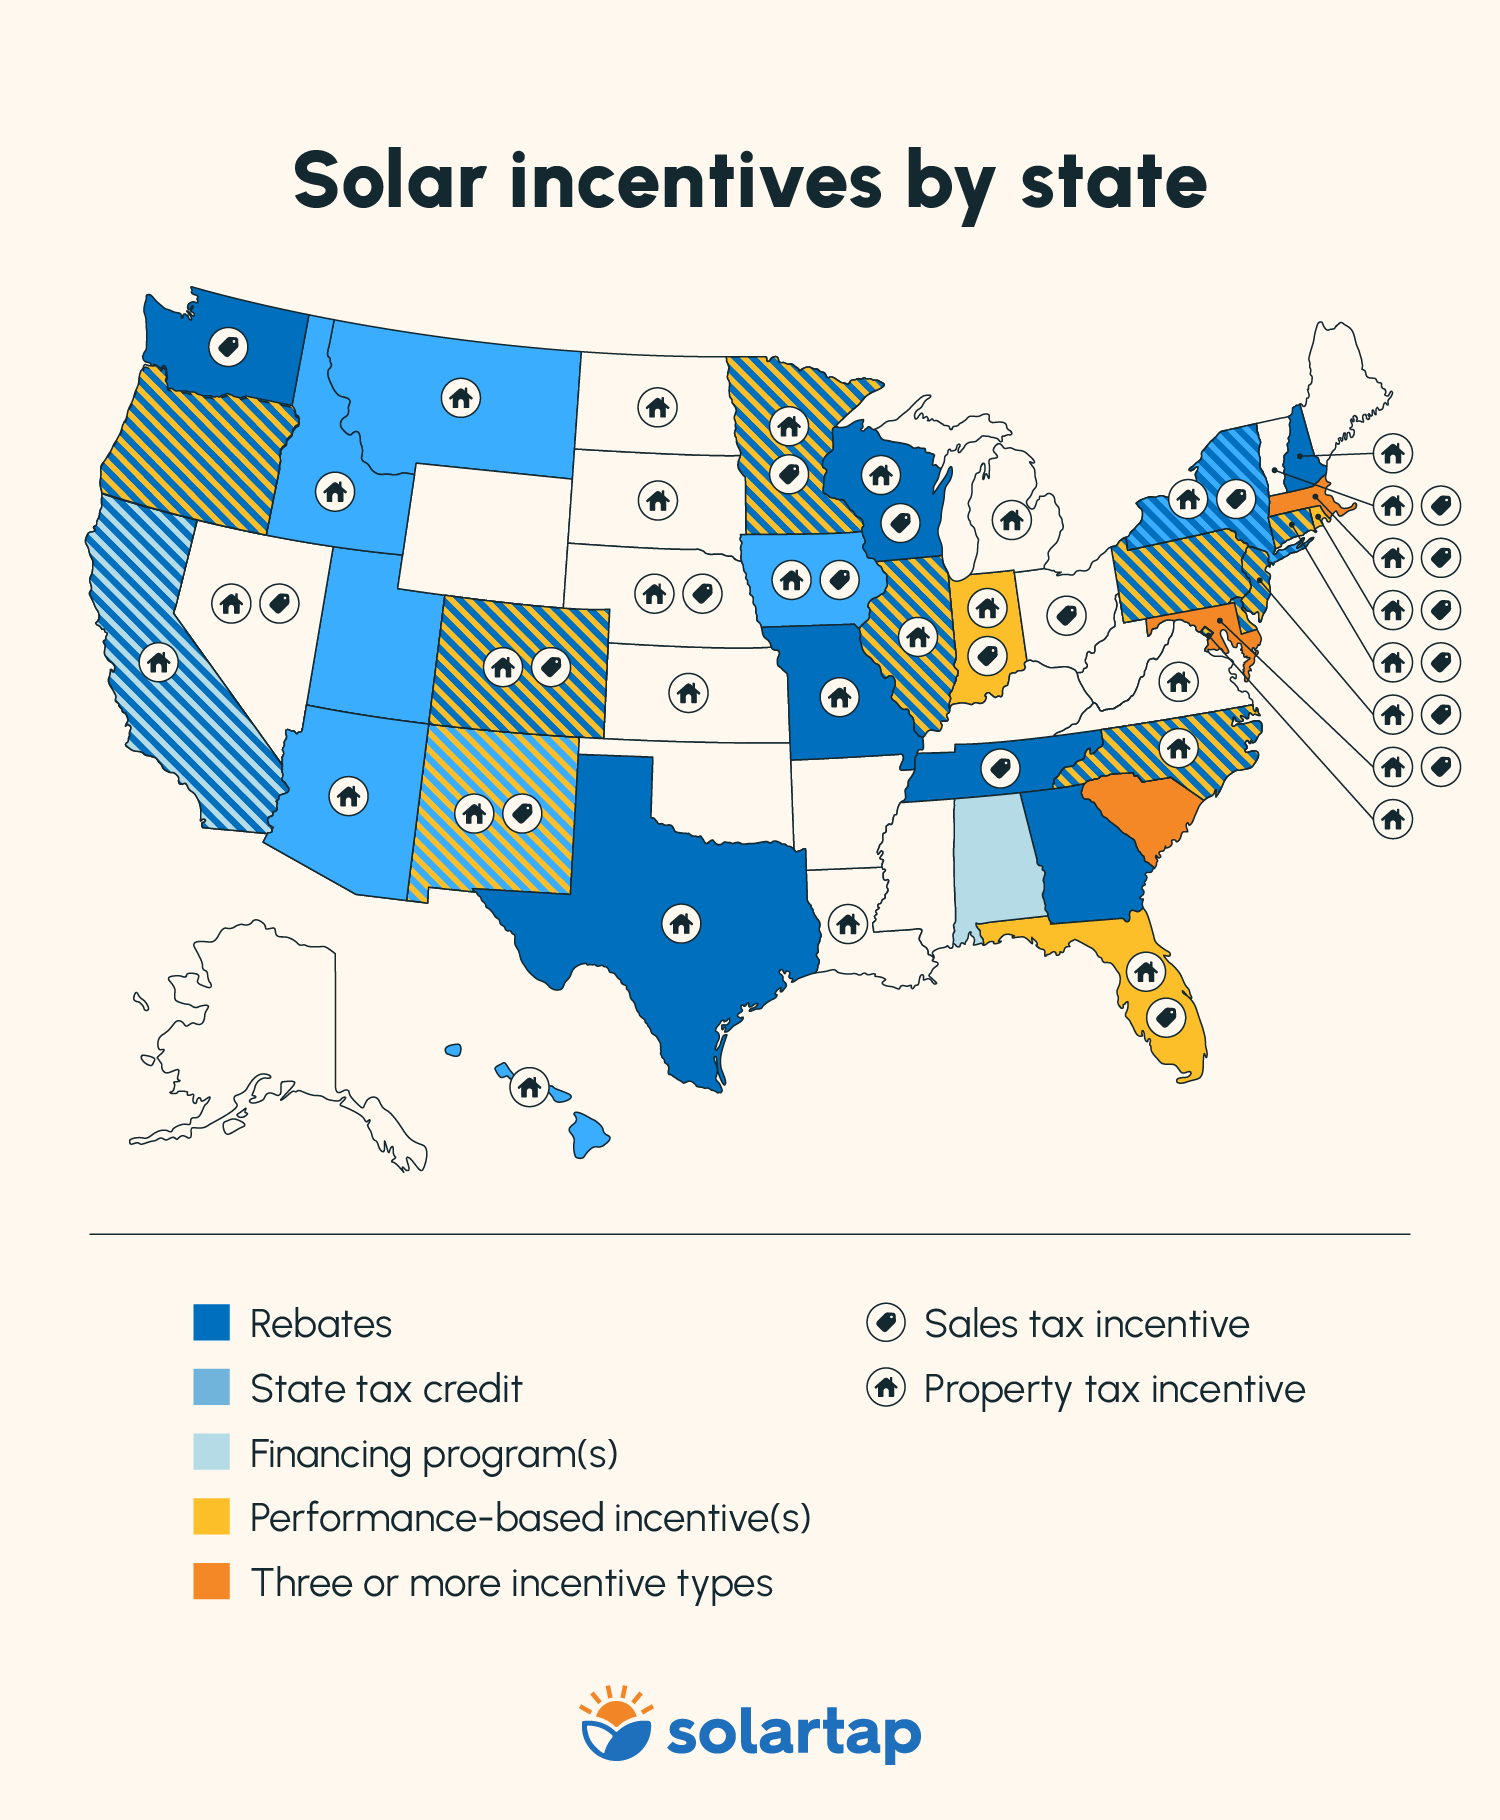 A color-coded map of the U.S. showing solar panel incentives by state